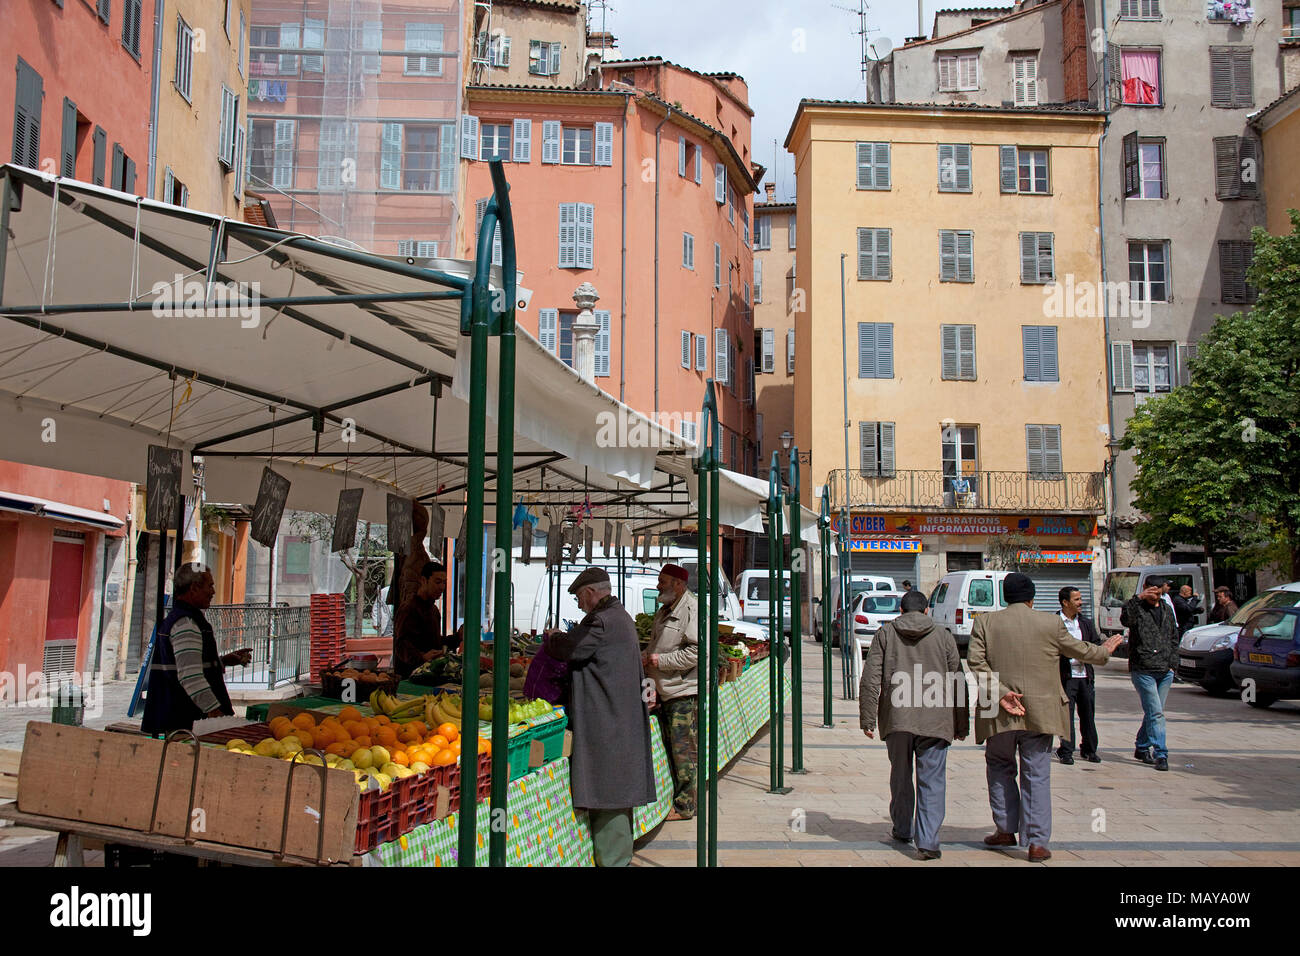 Market at old town of Grasse, Alpes-Maritimes, South France, France, Europe Stock Photo